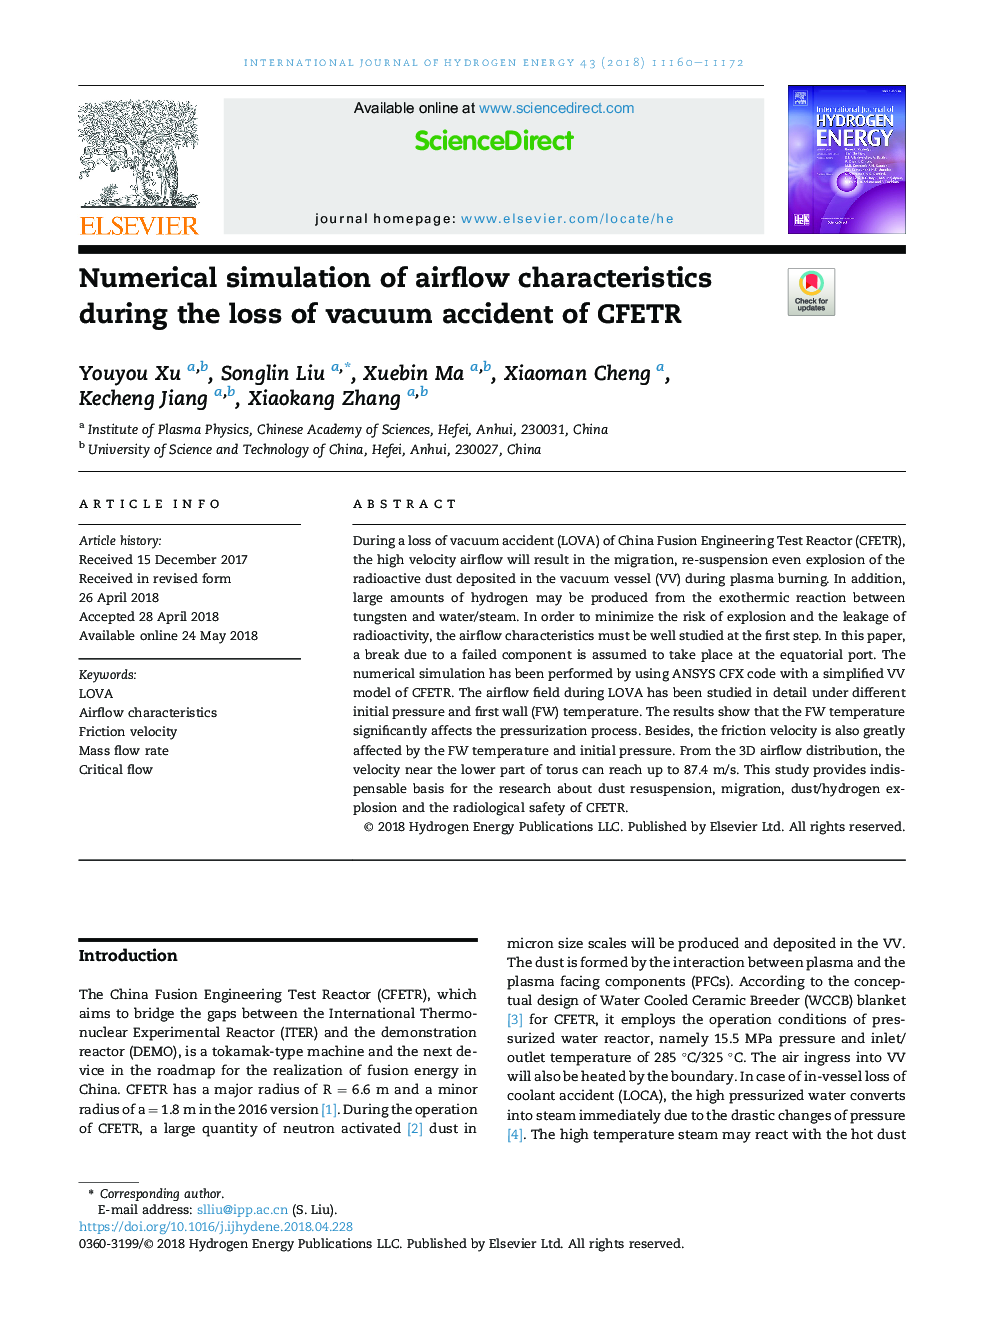 Numerical simulation of airflow characteristics during the loss of vacuum accident of CFETR